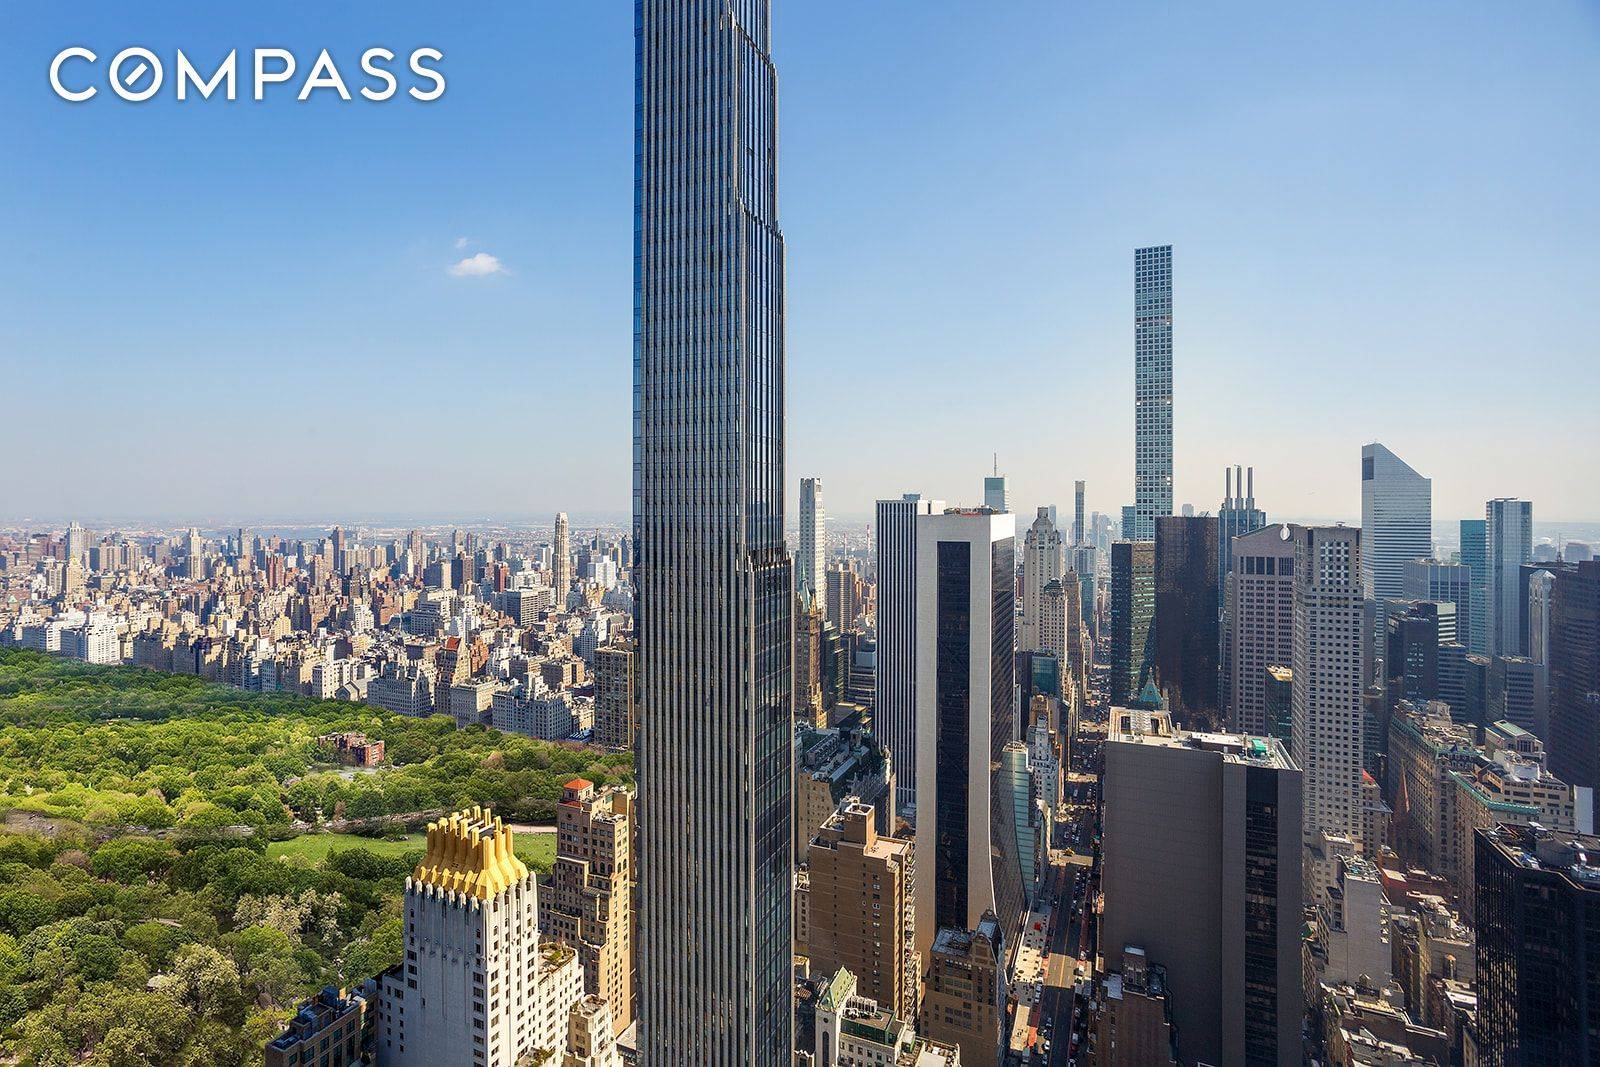 Unparalleled Central Park and NYC skyline views from the 76th Floor of Metropolitan Tower.